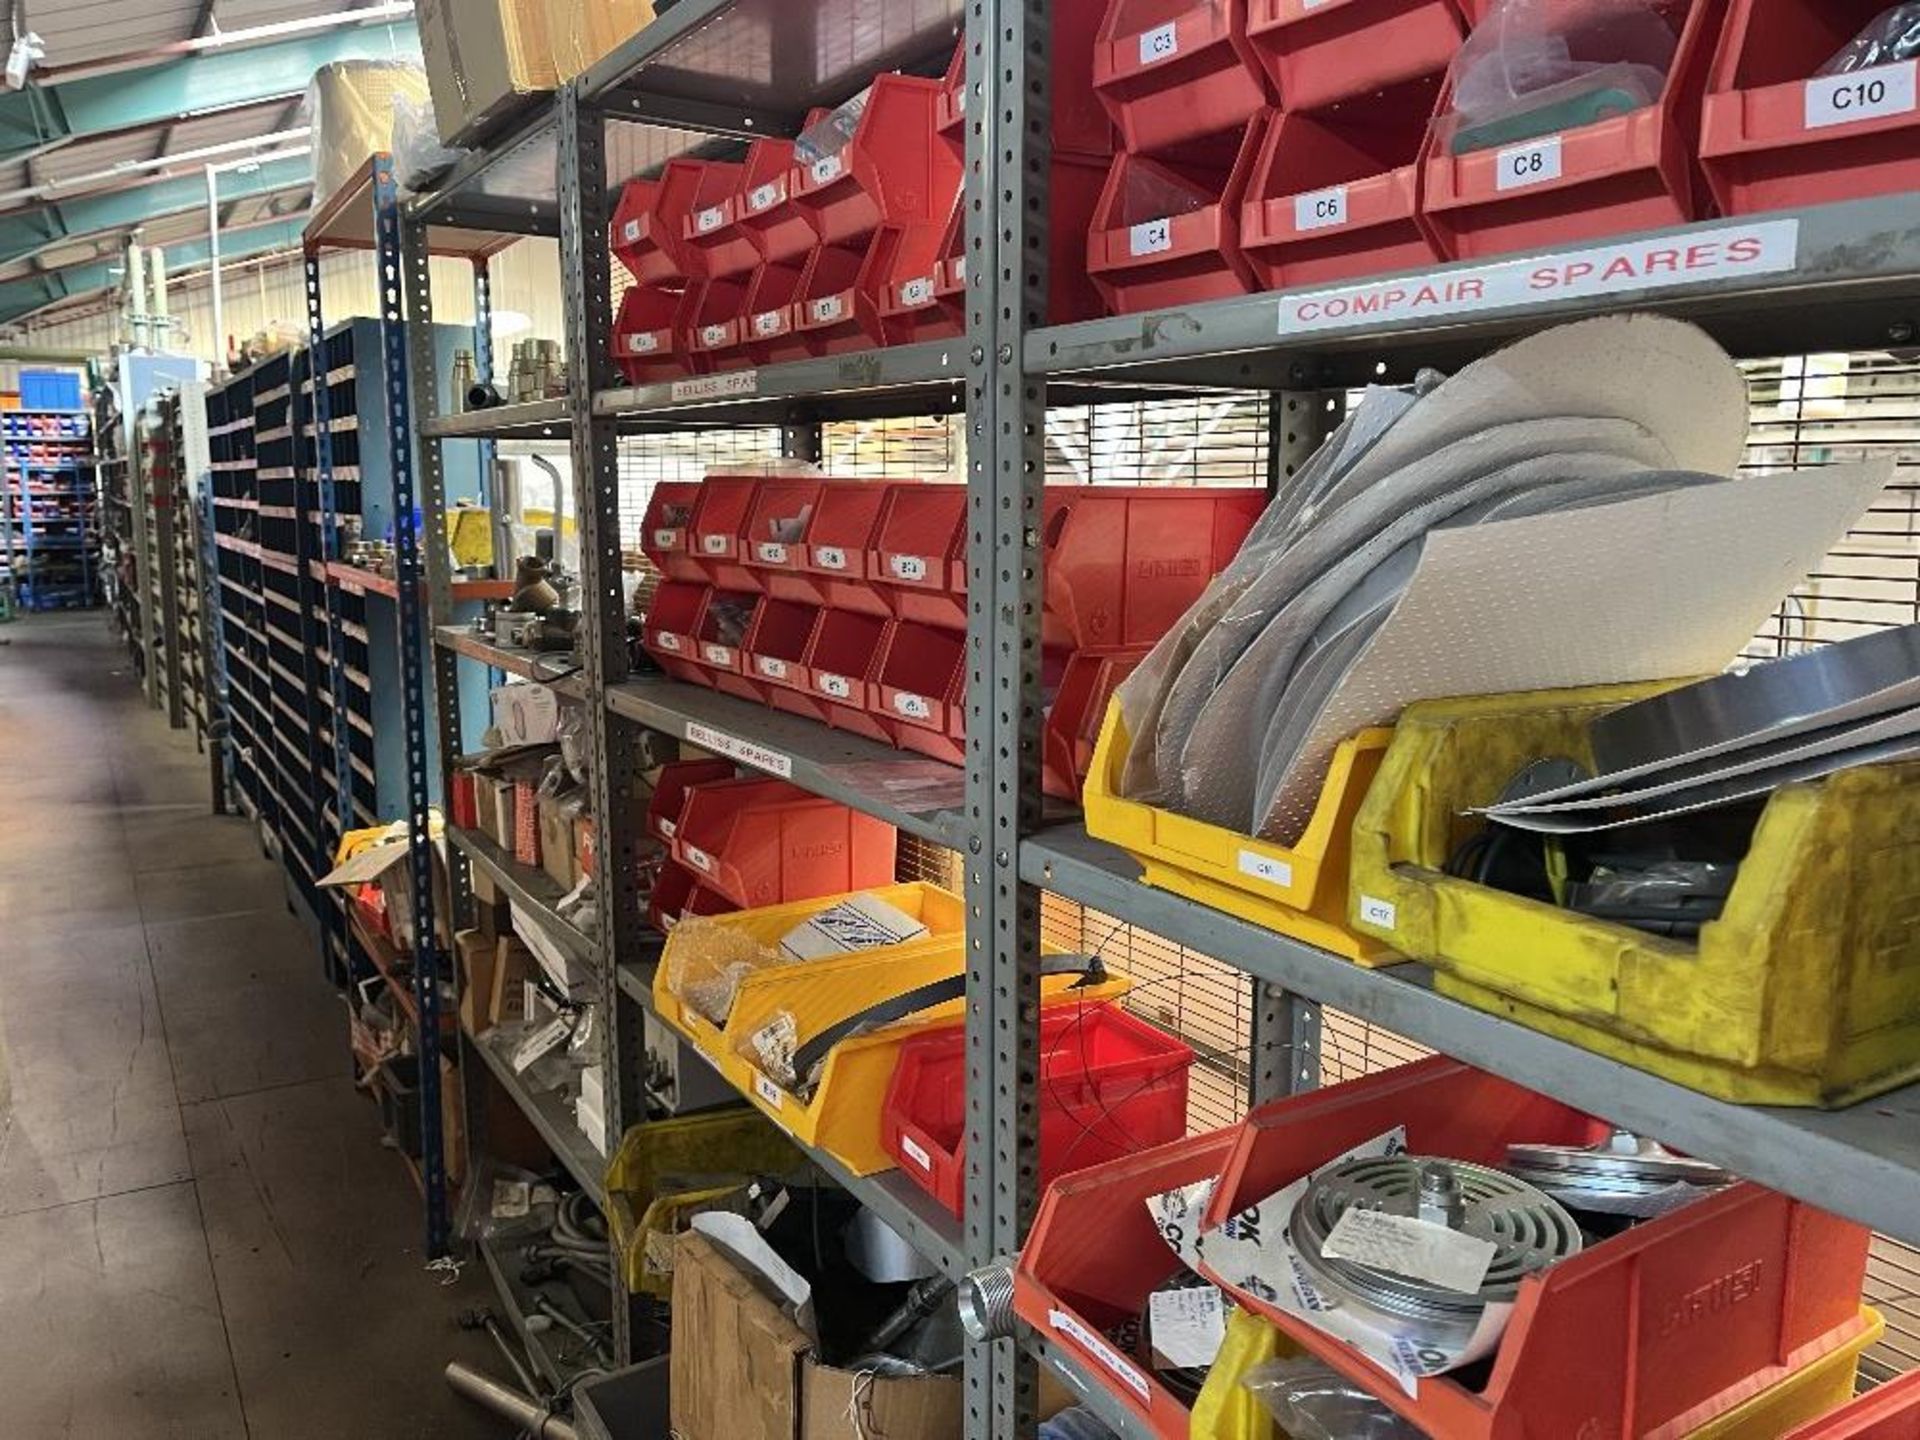 Contents of mezzanine floor containing large range of machine spare parts and consumables - Image 21 of 47